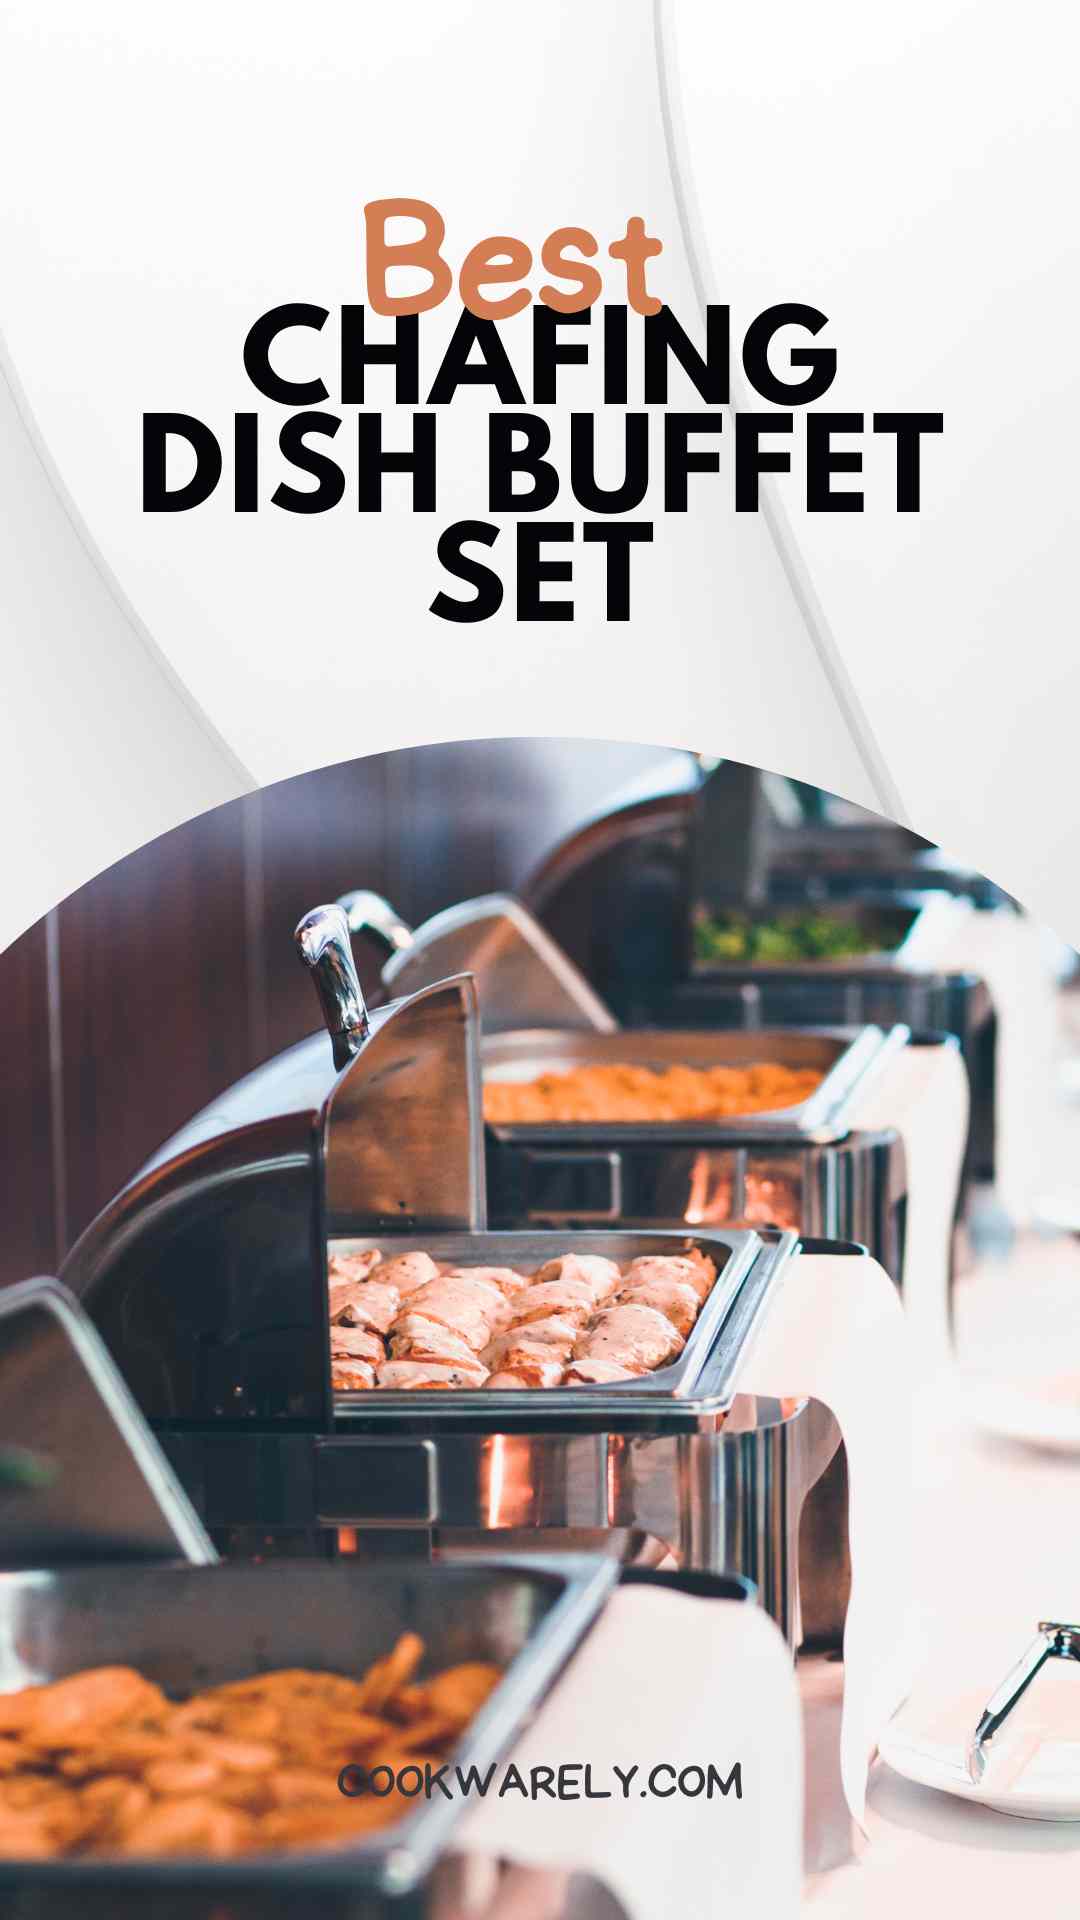 What Is The Best Chafing Dish Buffet Set